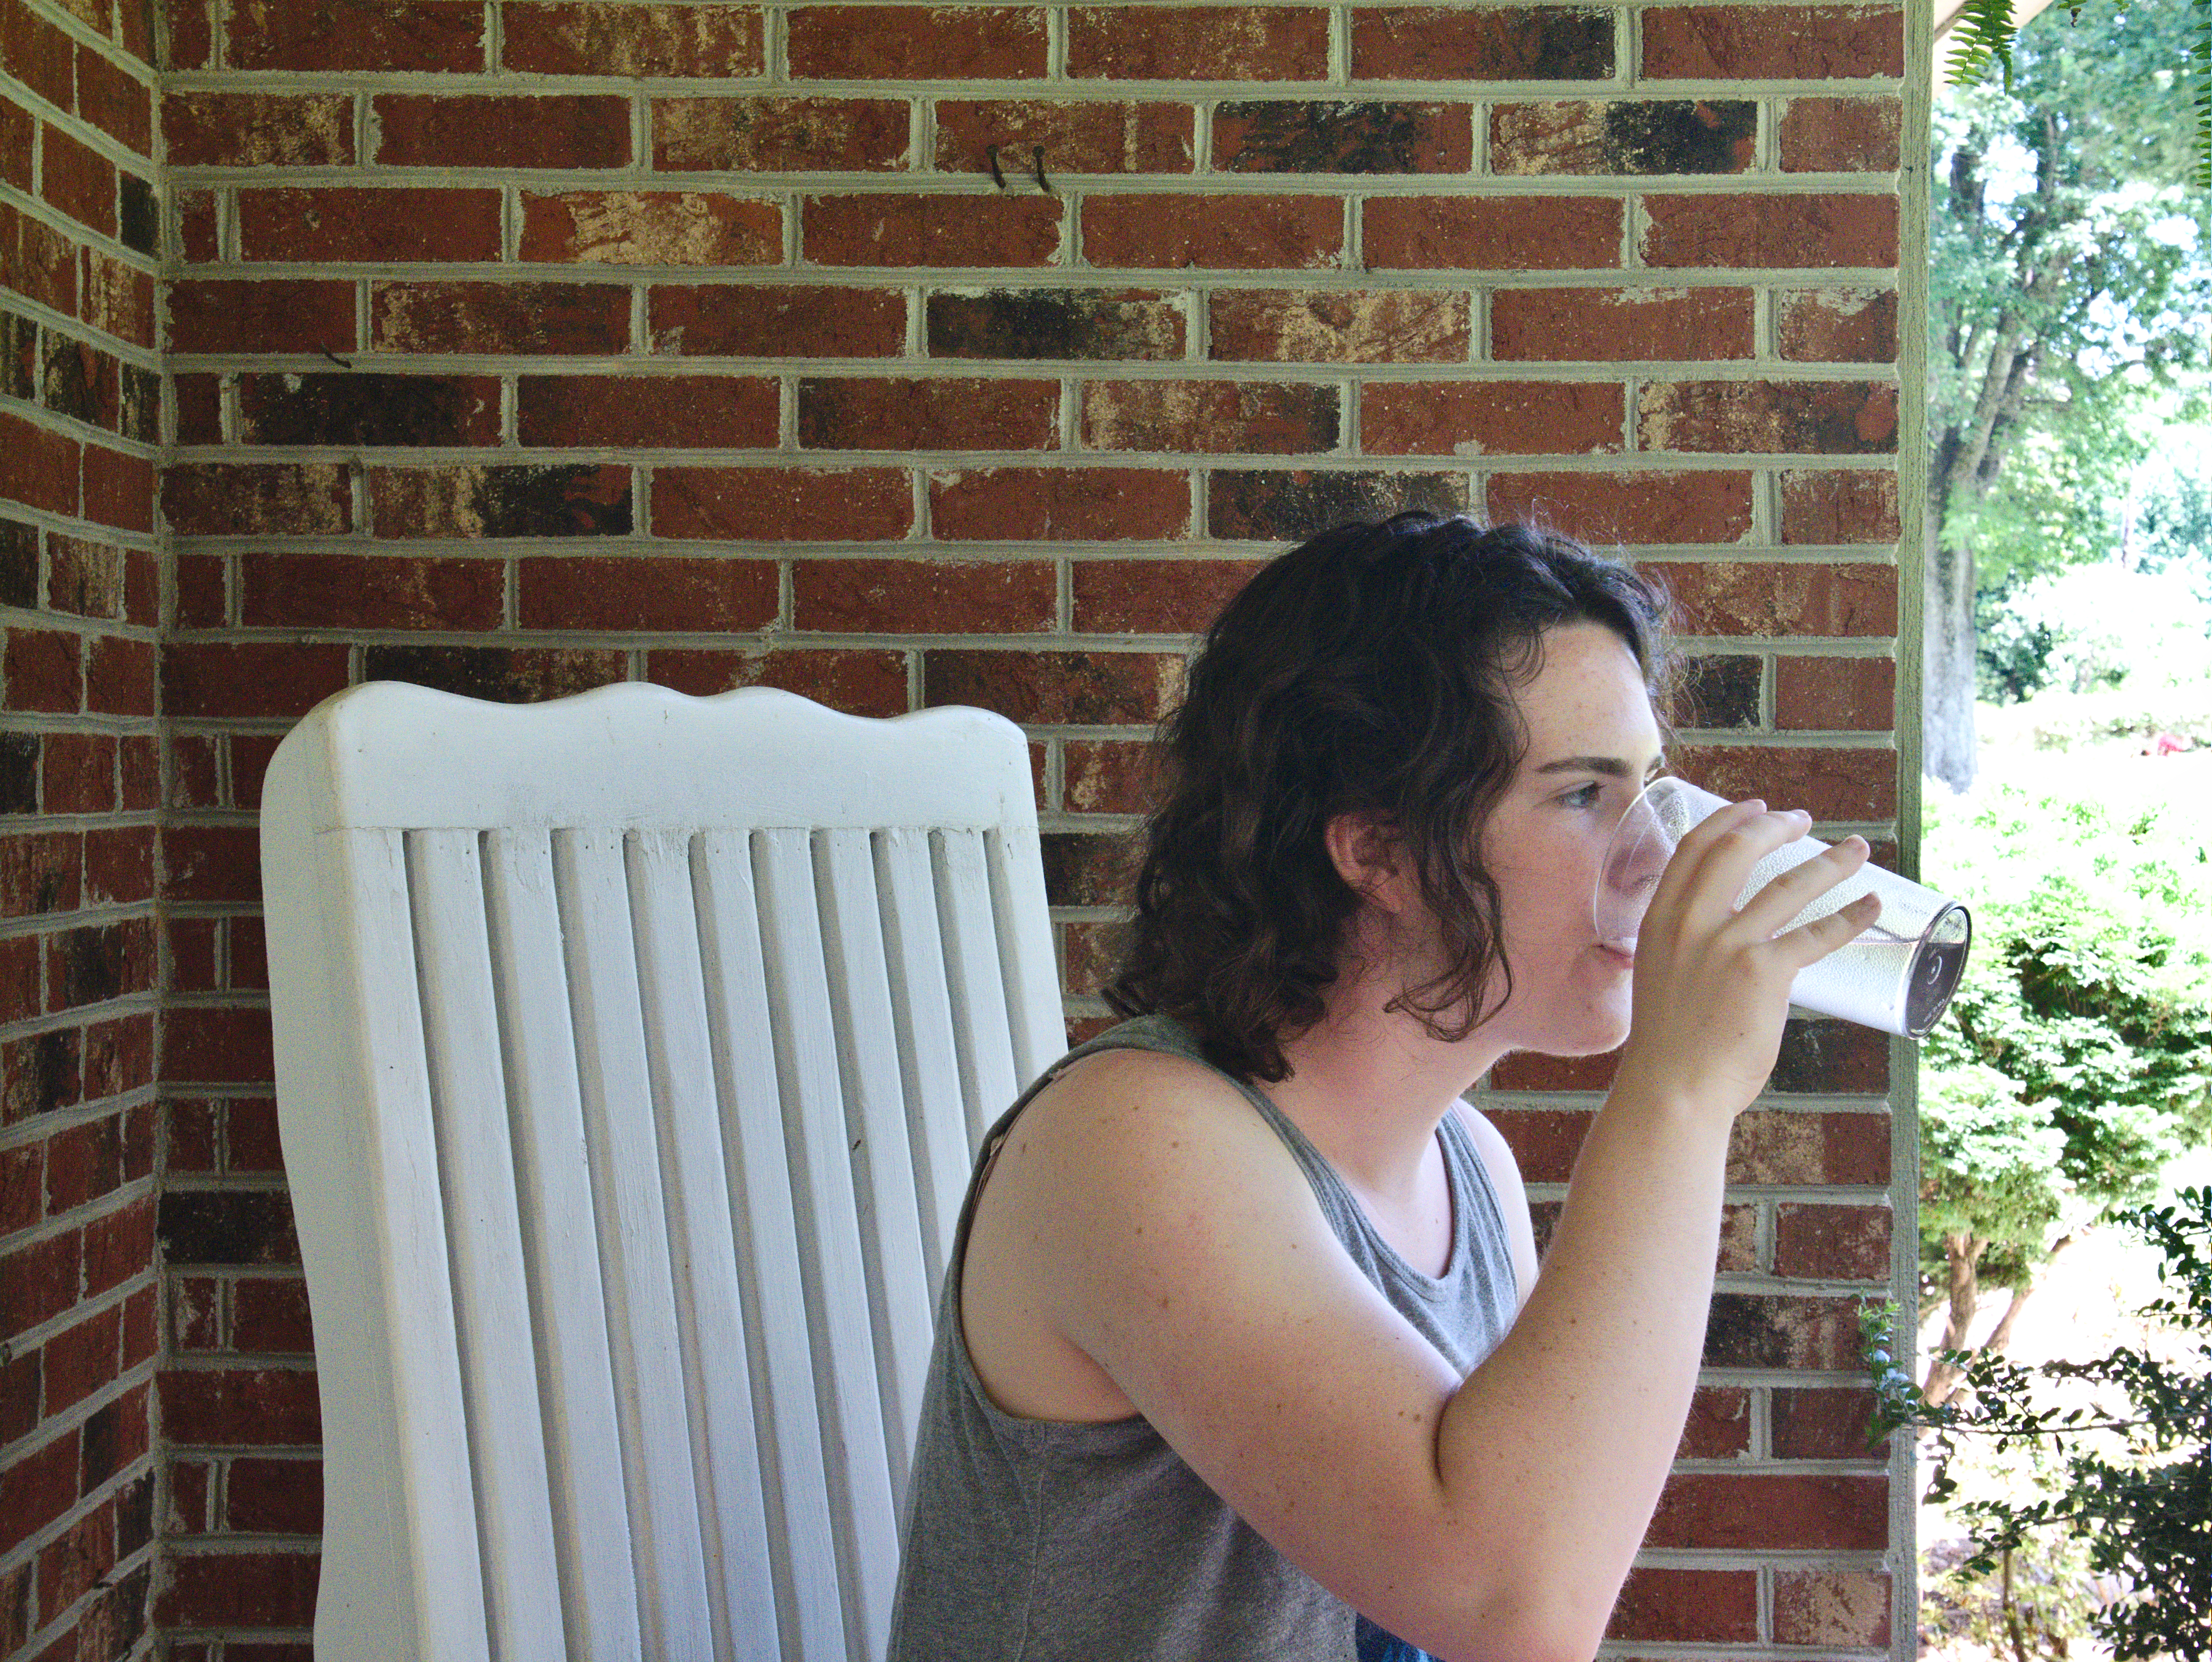 A girl drinks a glass of water